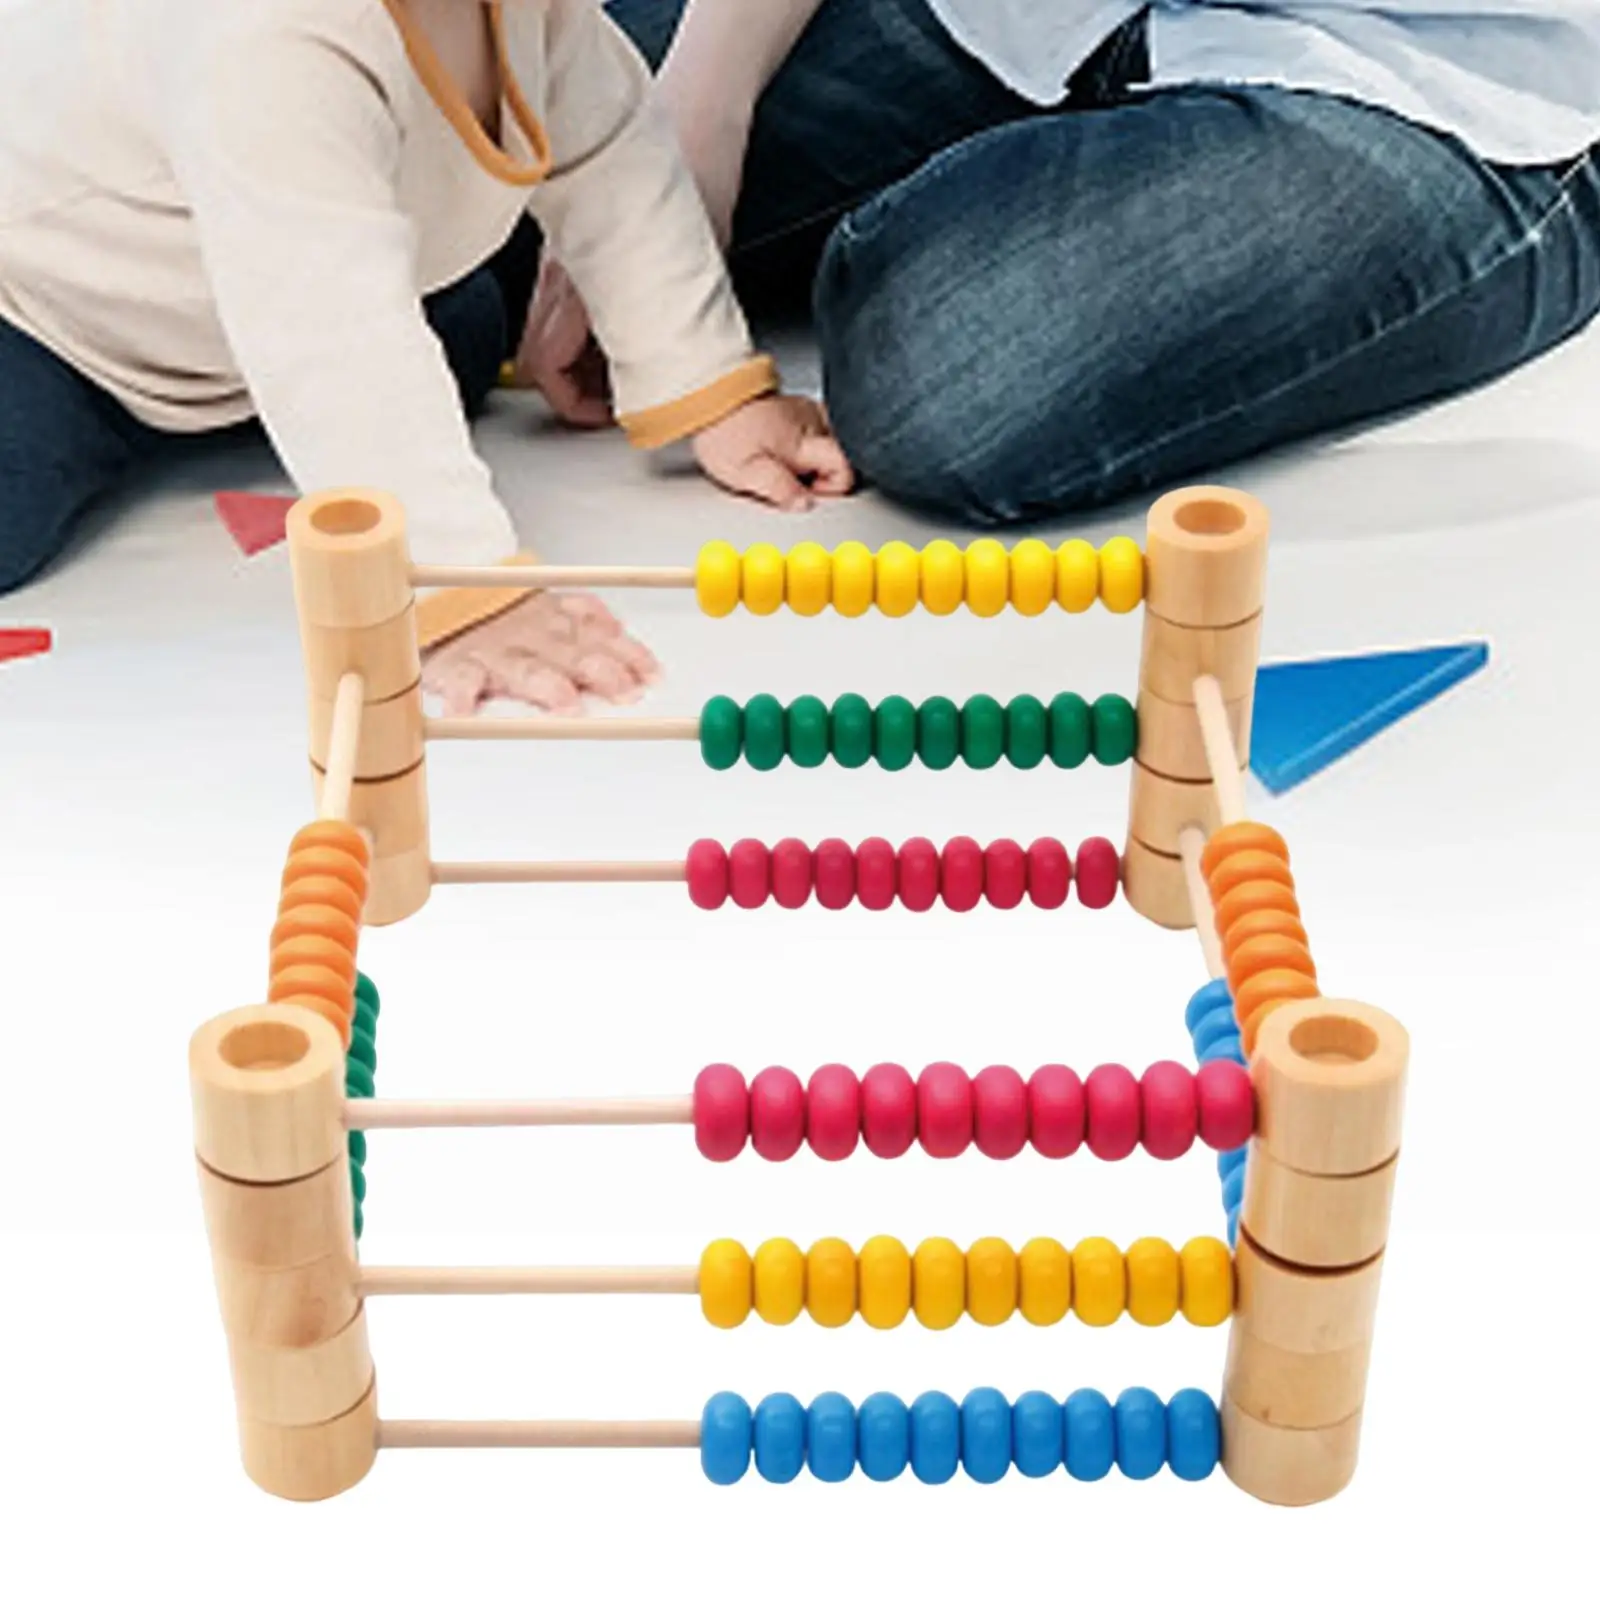 Educational Wooden Abacus Frame Materials Math Learning Toy Manipulative